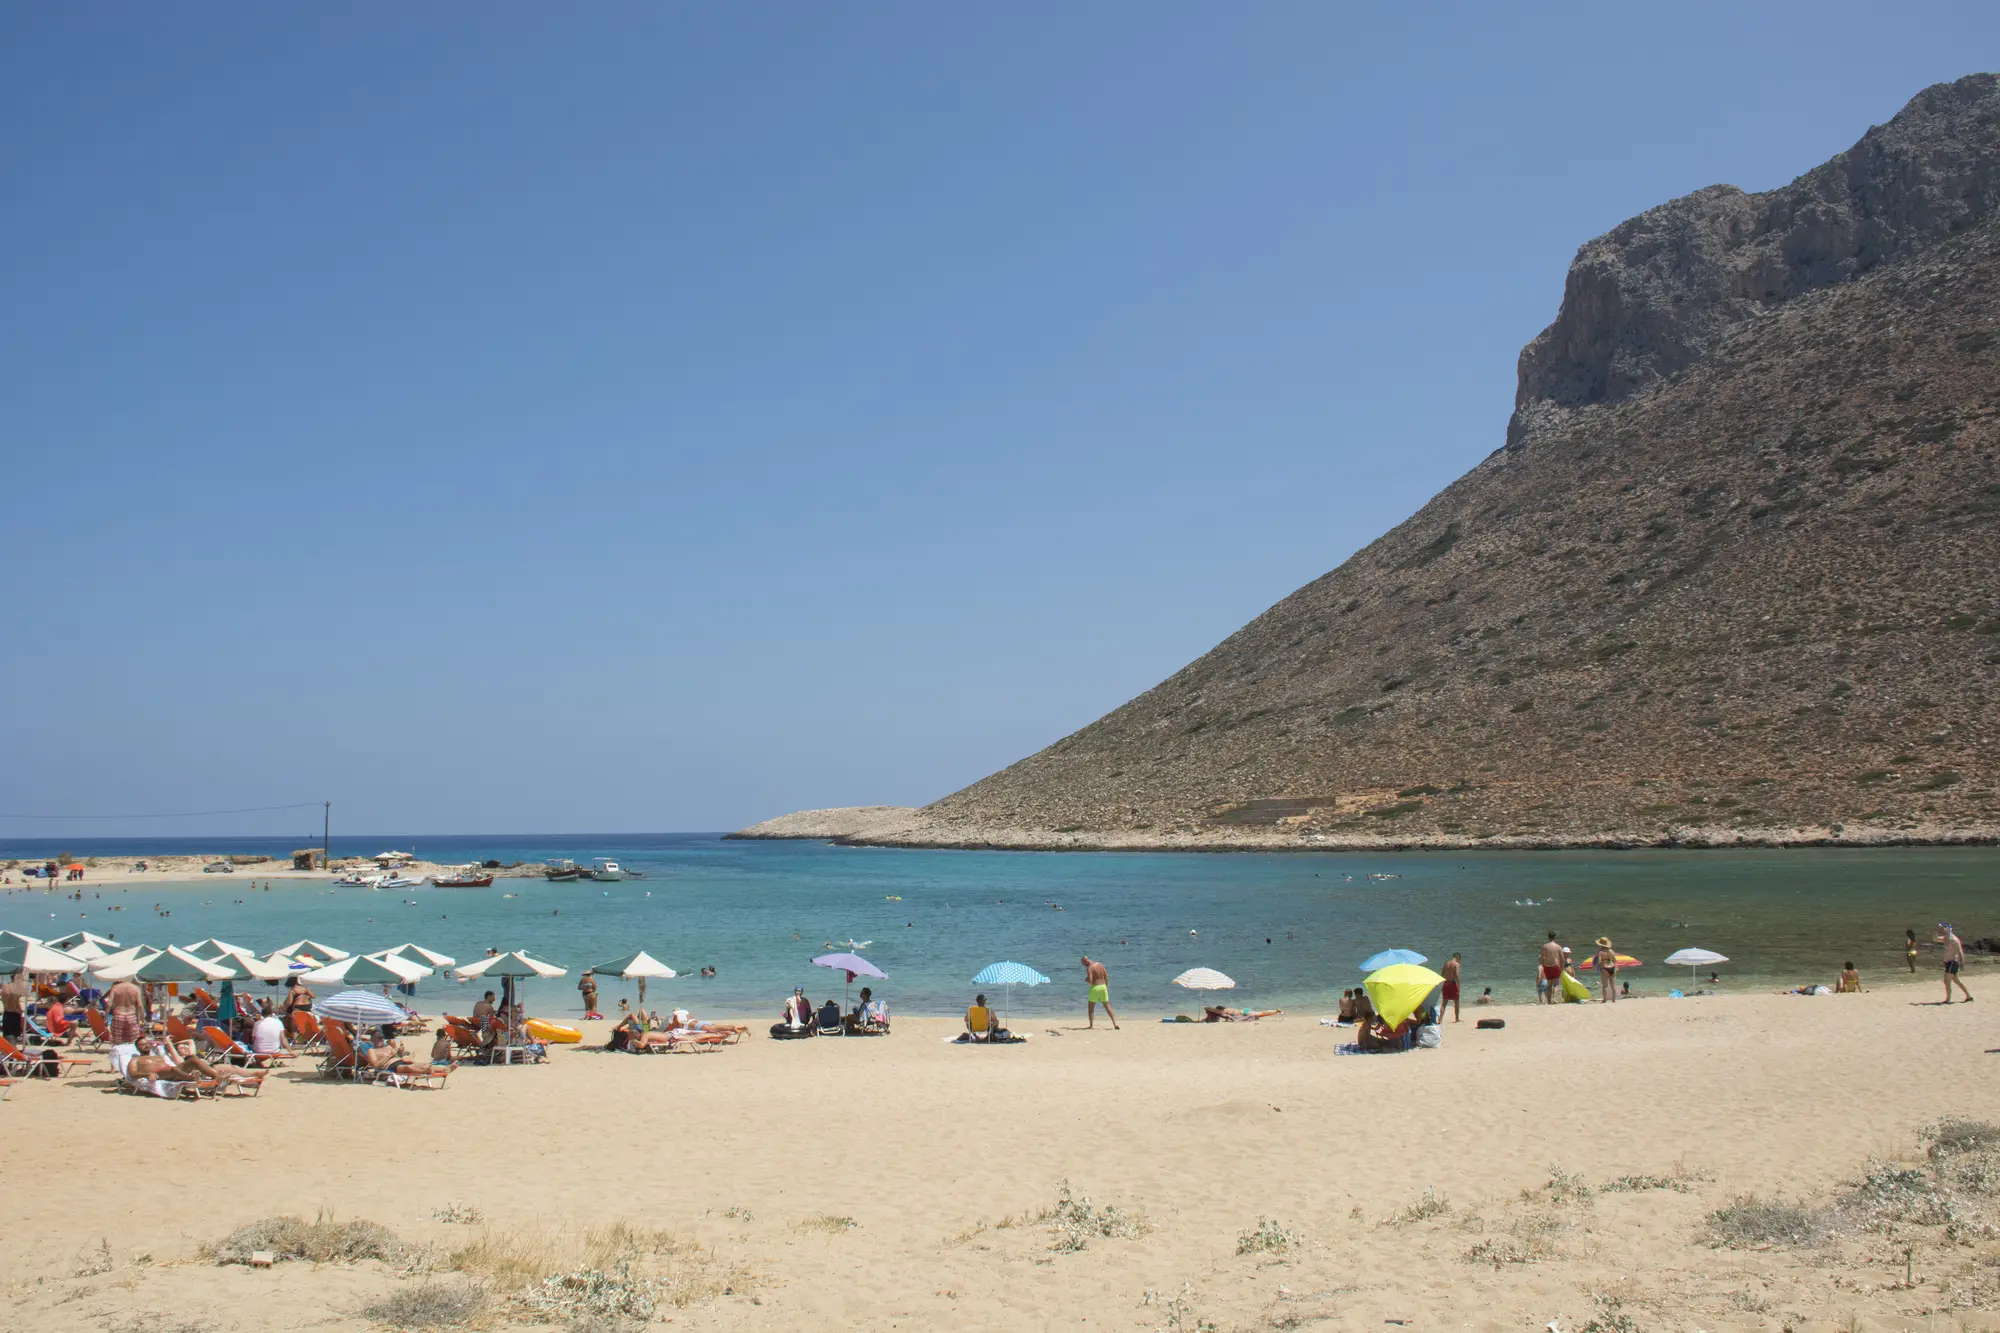 Sunbeds of a flat strip of light sand next to a tall hill and shallow blue water, Stavros Beach in Chania.